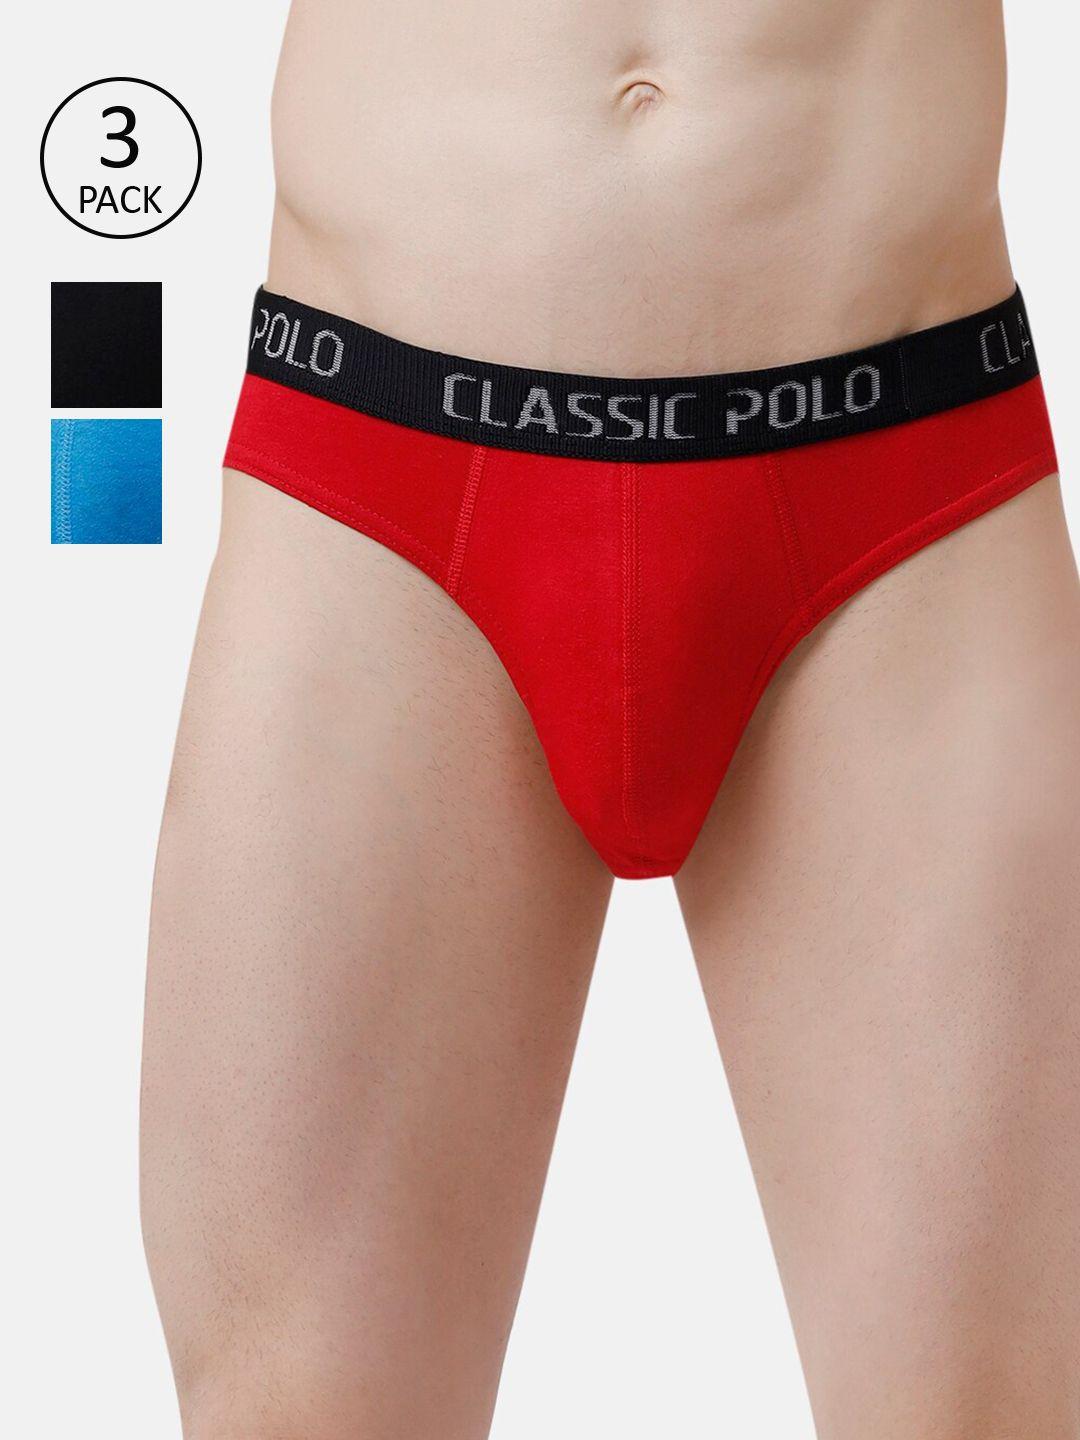 classic polo men pack of 3 men solid basic briefs